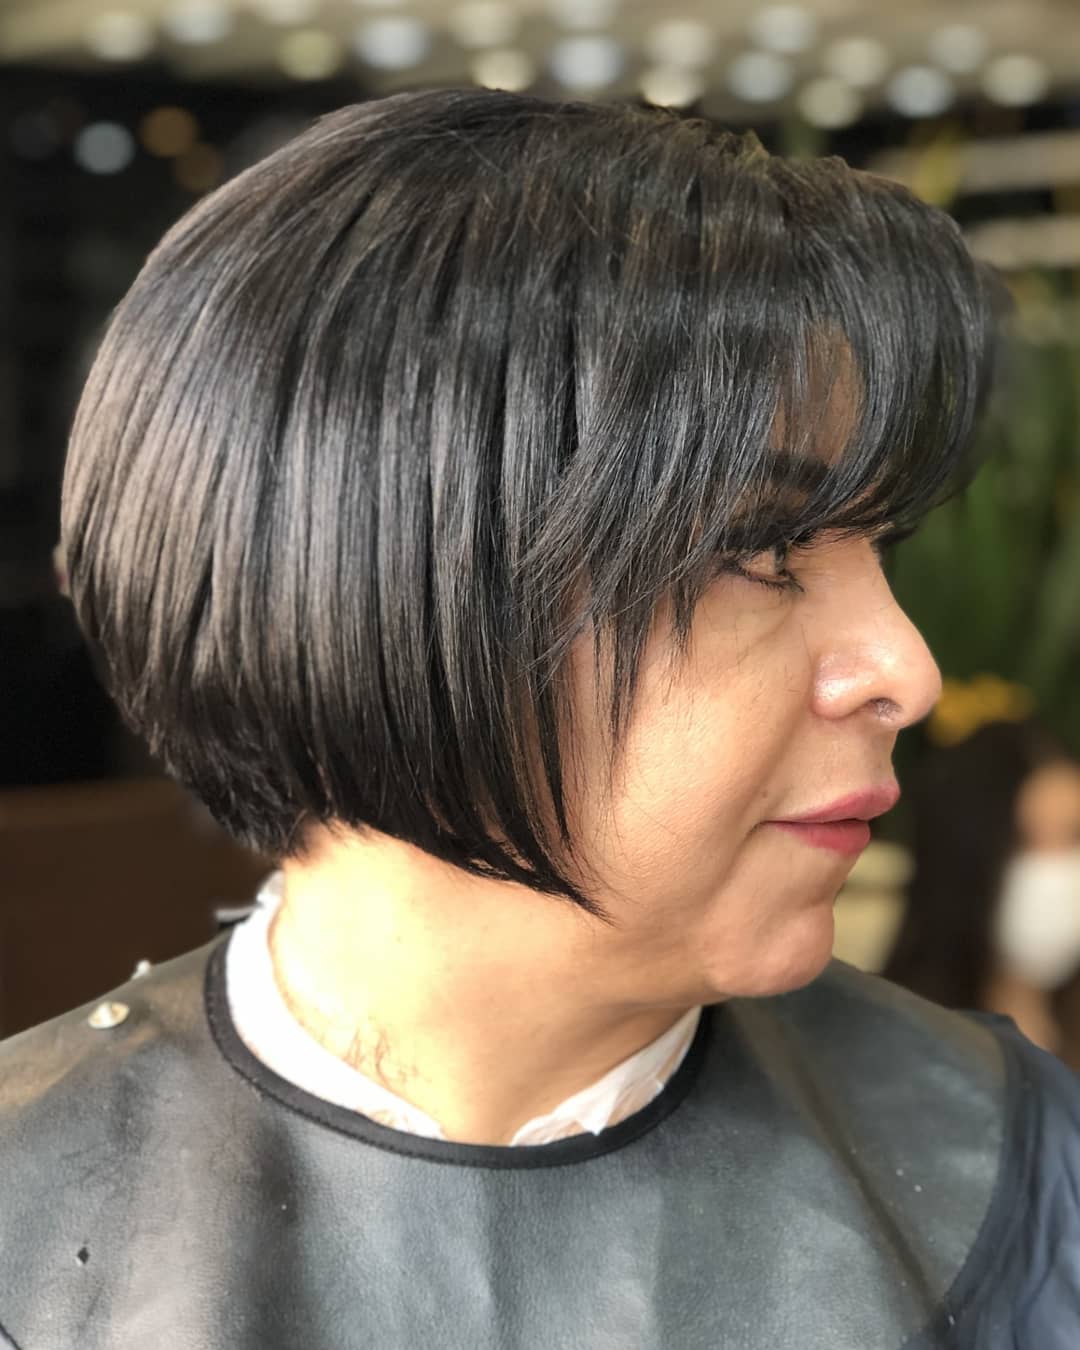 Dark haircuts for ladies over 60: 15 ideas that will correct the image